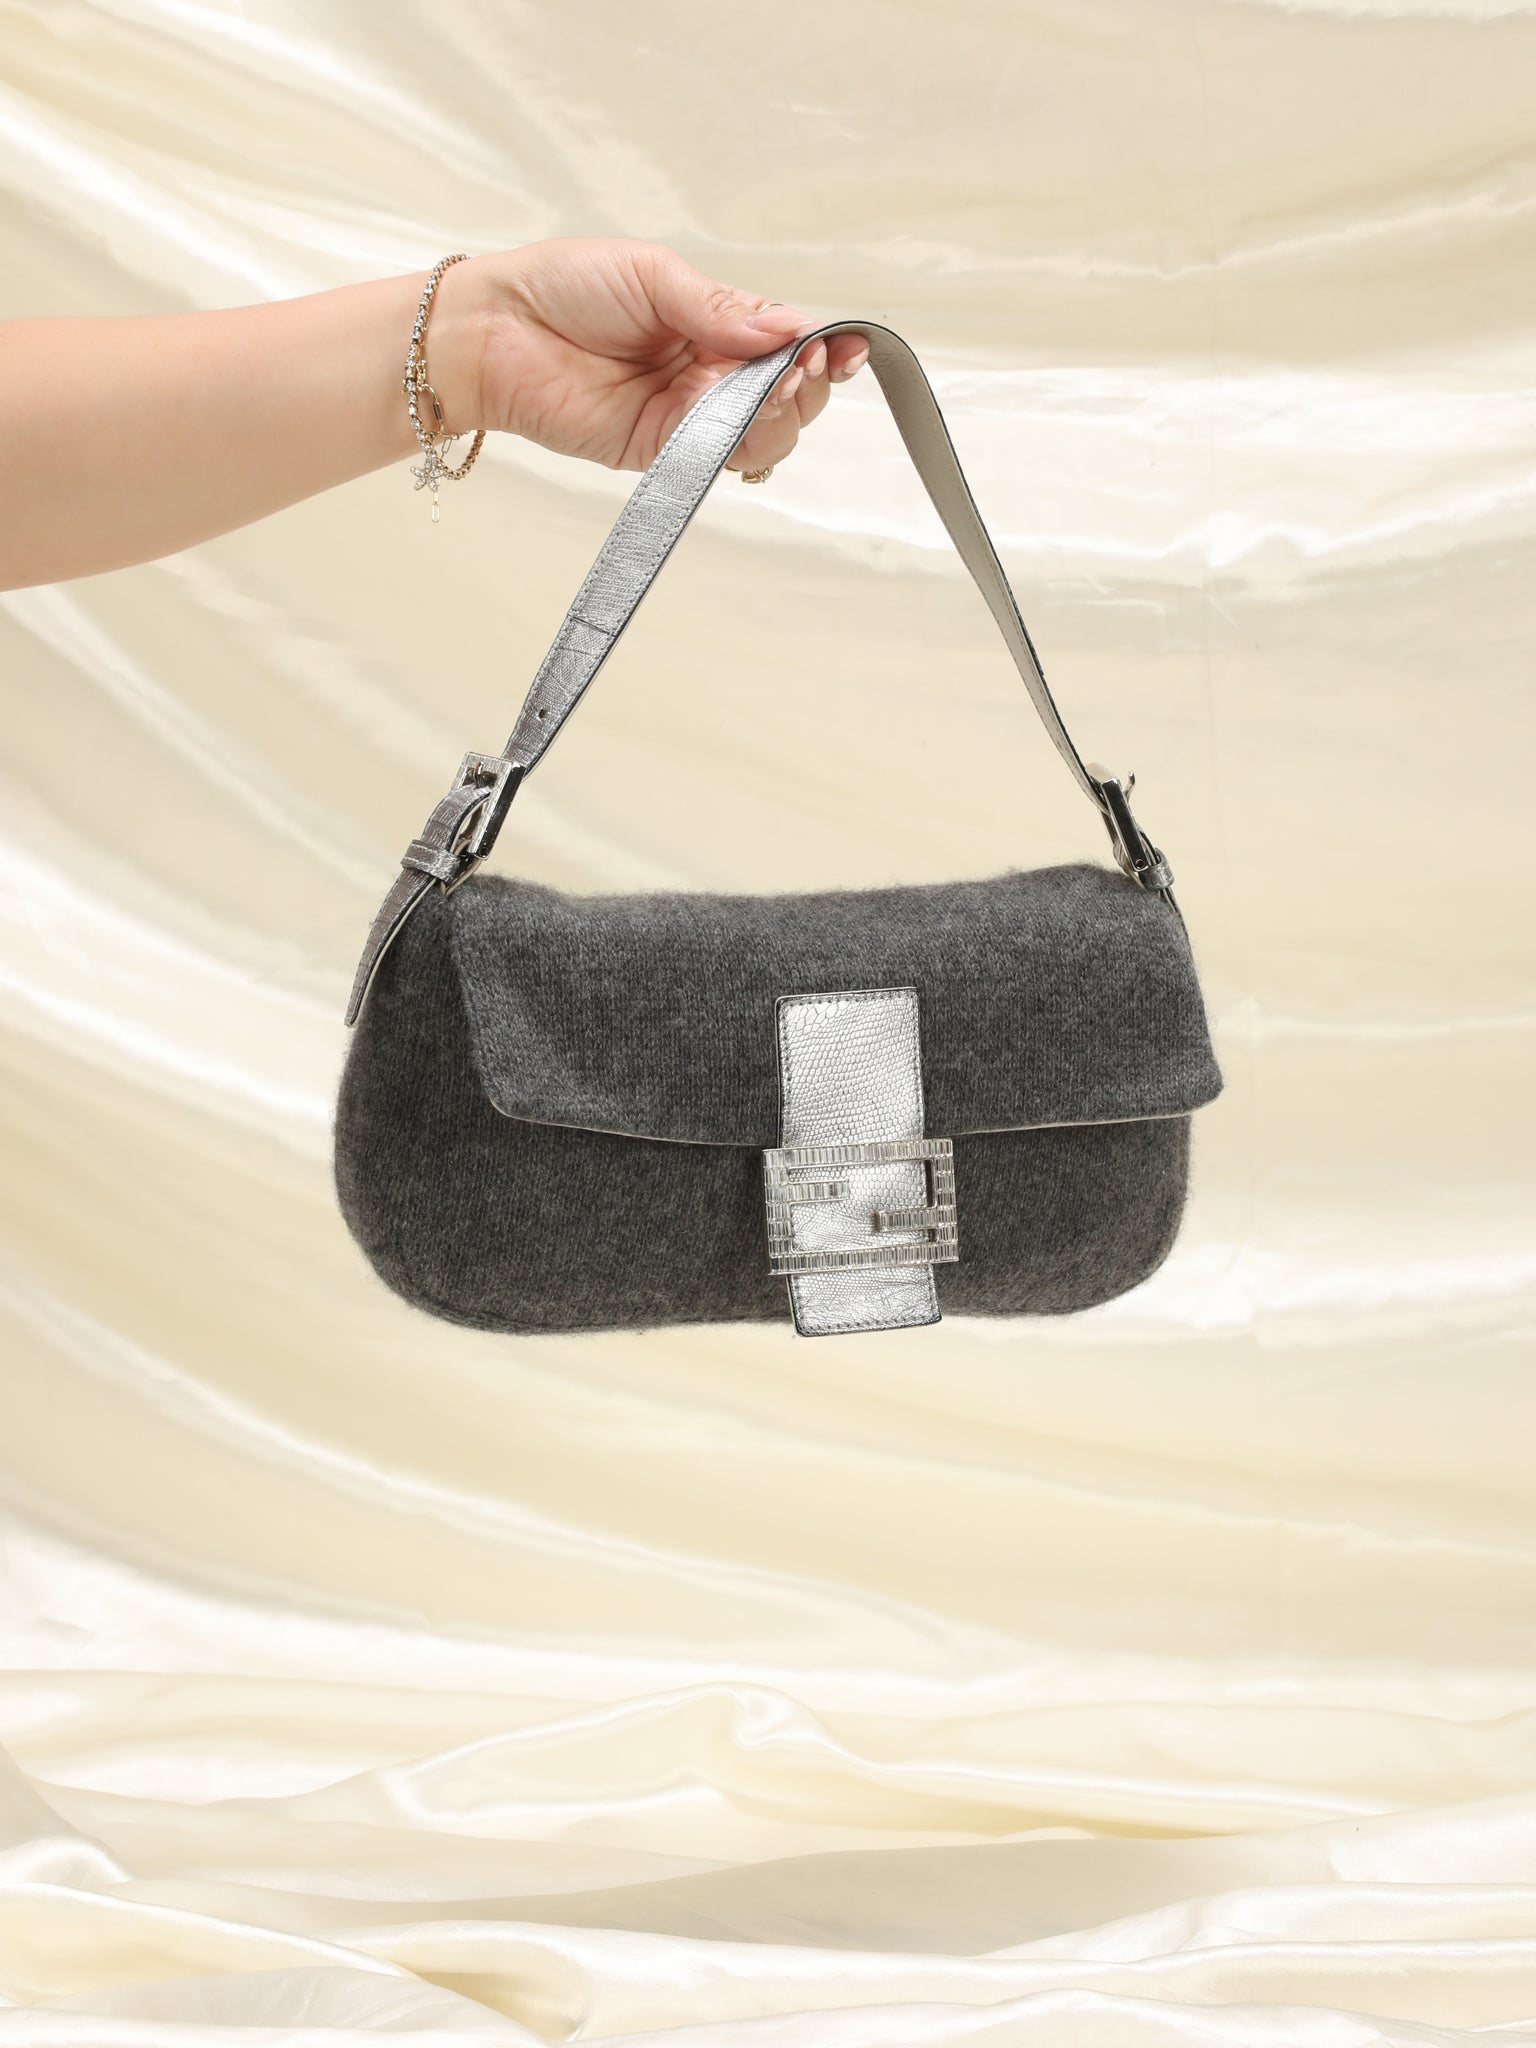 Extremely Rare Fendi Wool Crystal Baguette